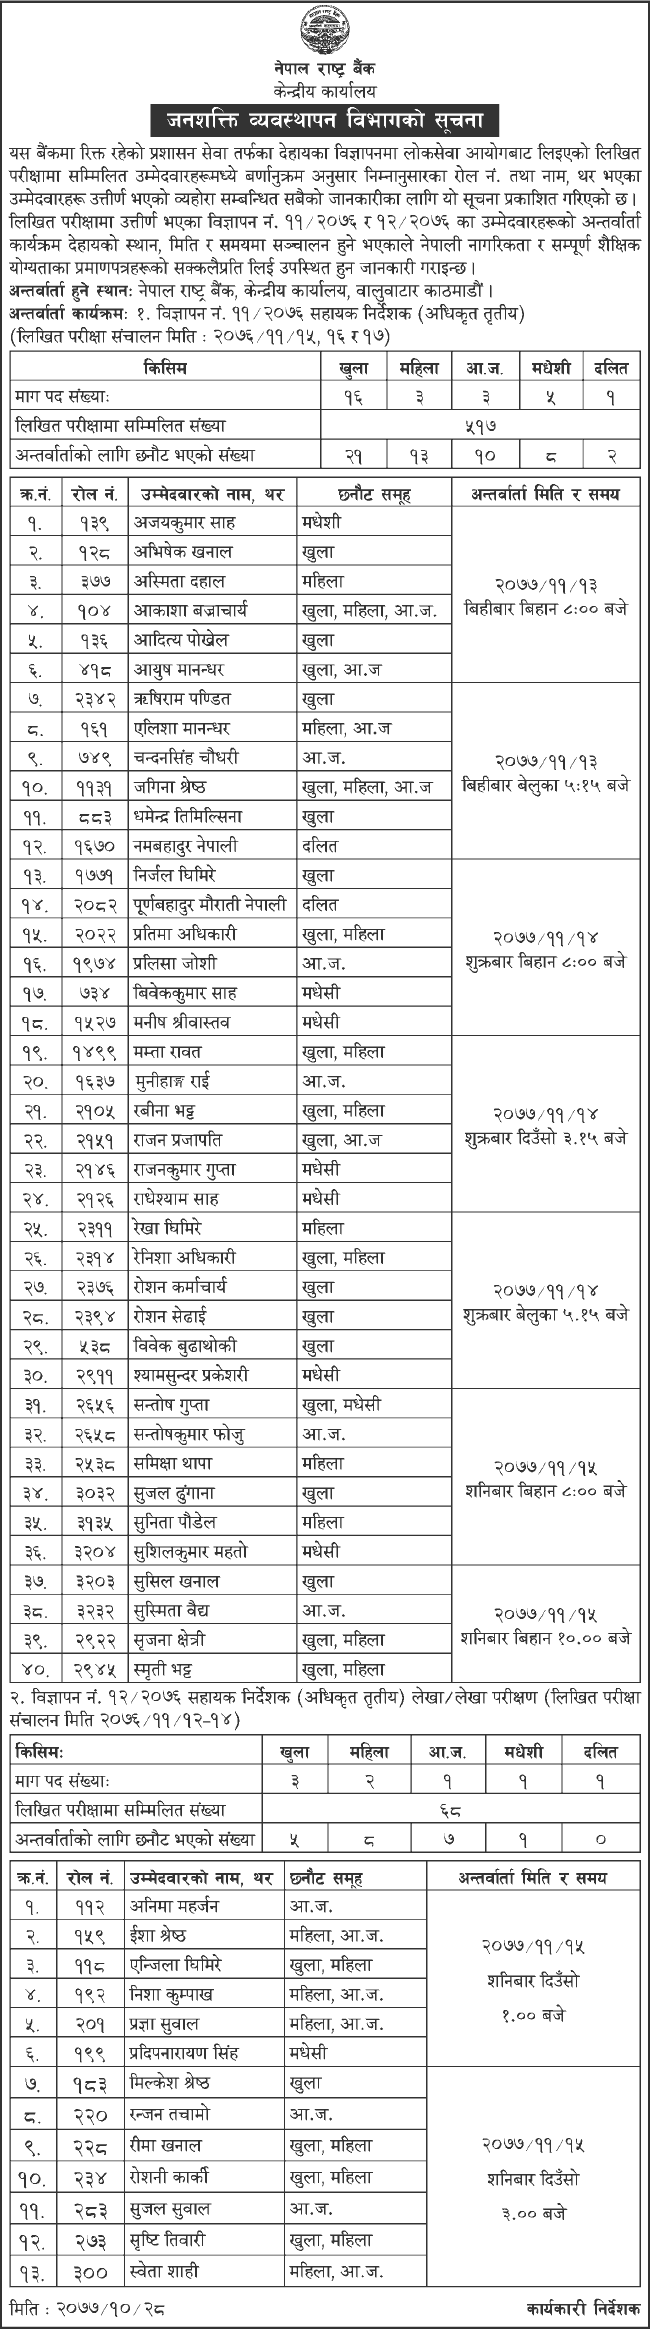 Nepal Rastra Bank Assistant Post Written Exam Result and Interview Schedule